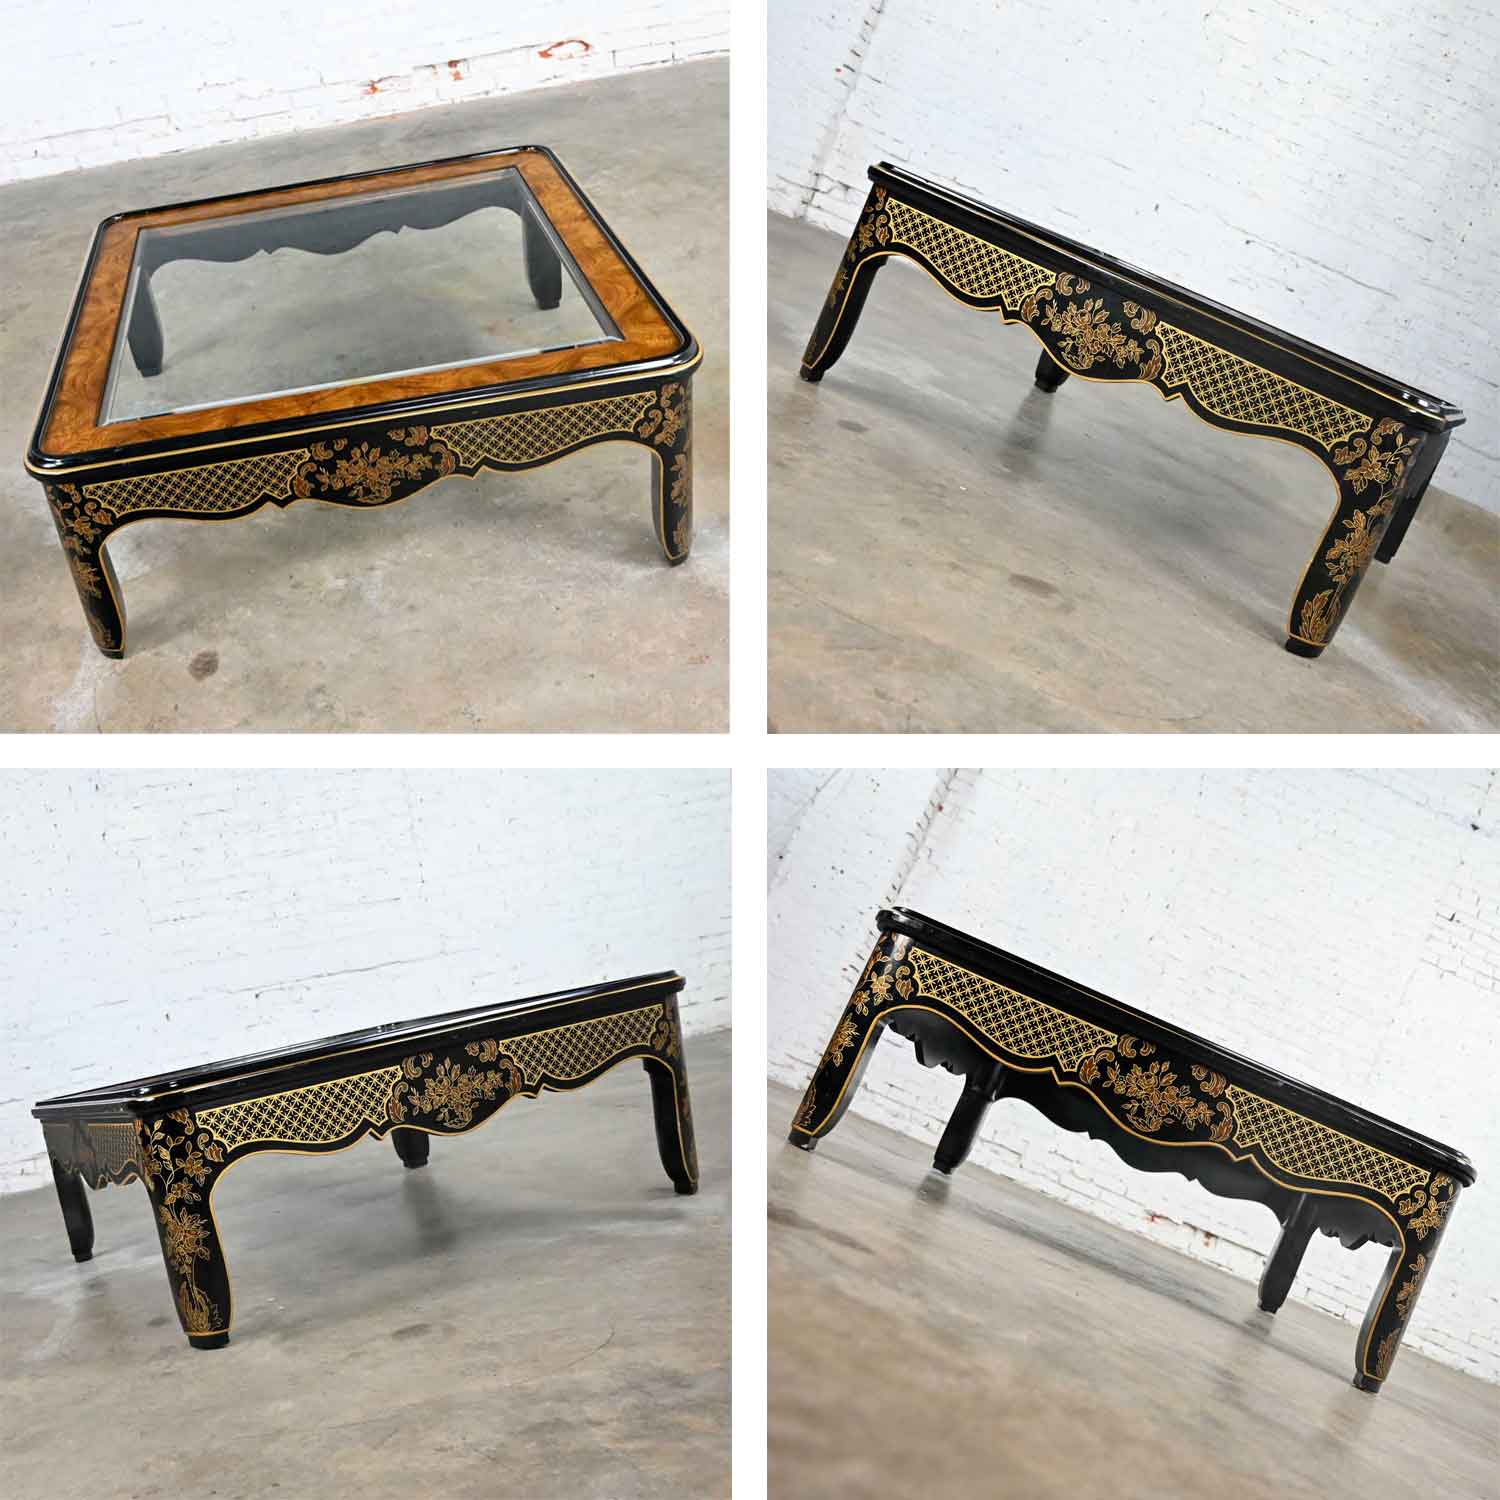 Drexel Heritage ET Cetera Collection Chinoiserie Black & Gold Painted & Burl Coffee Table Glass Insert